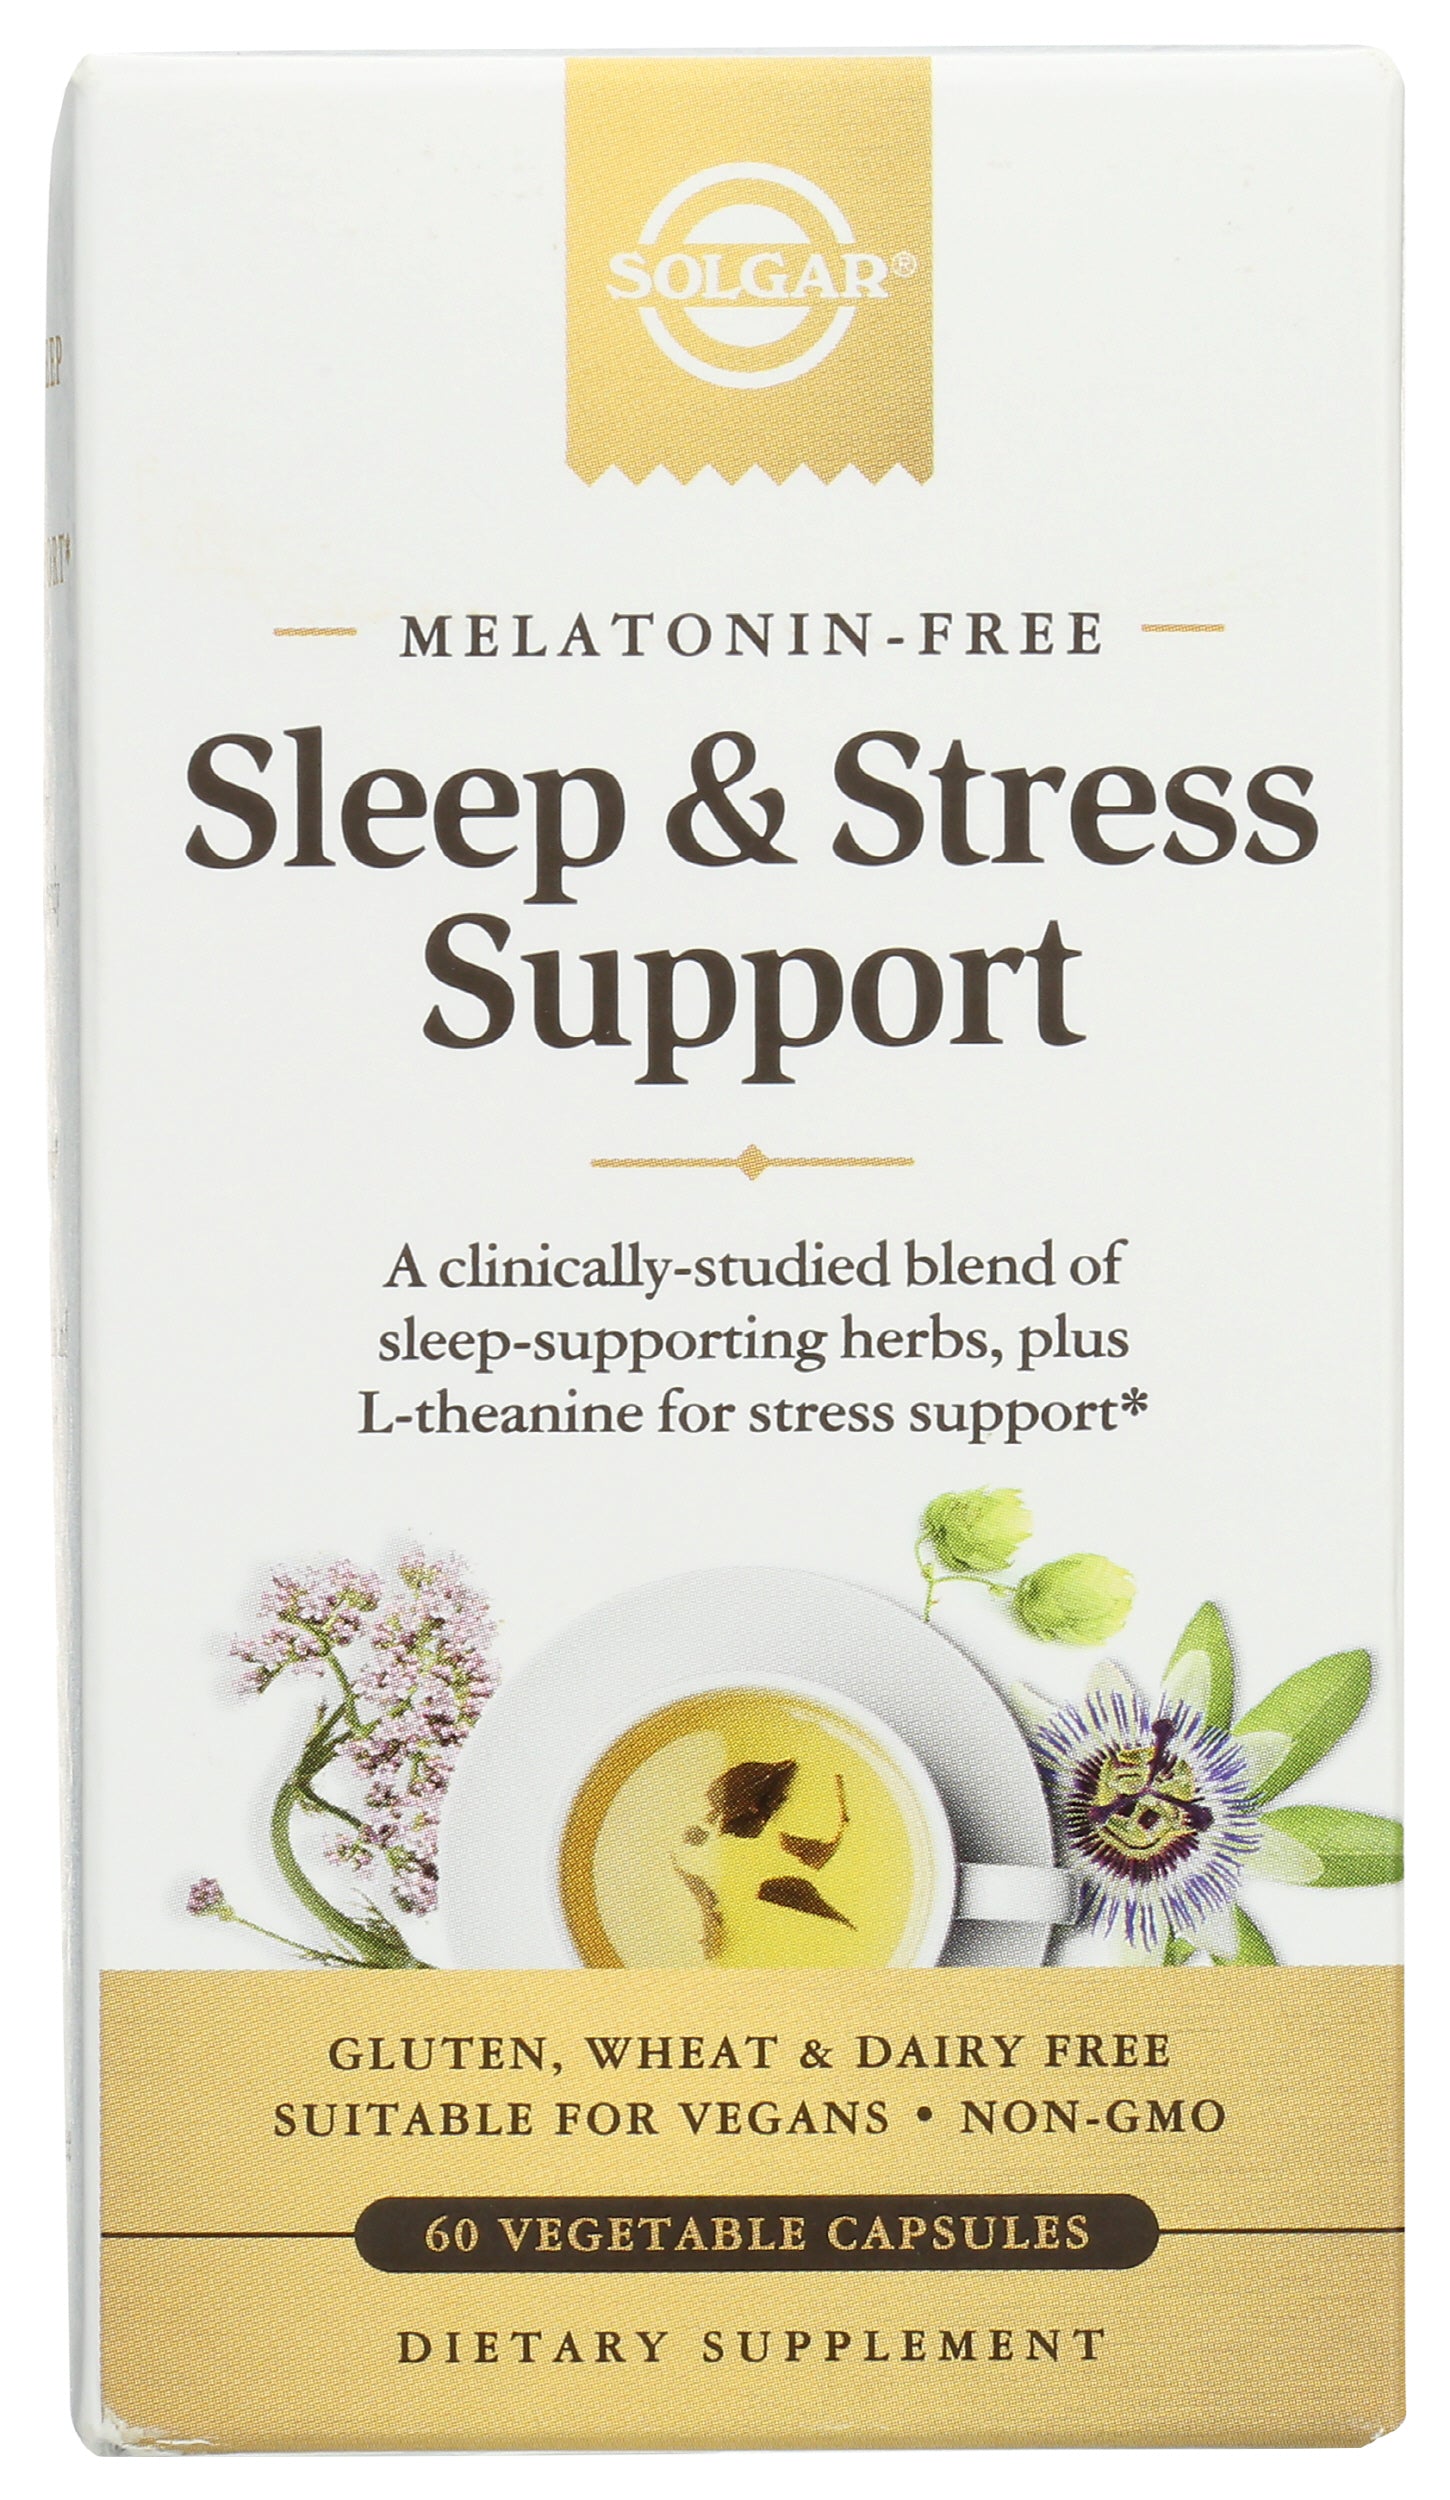 Solgar Sleep & Stress Support 60 Vegetable Capsules Front of Box